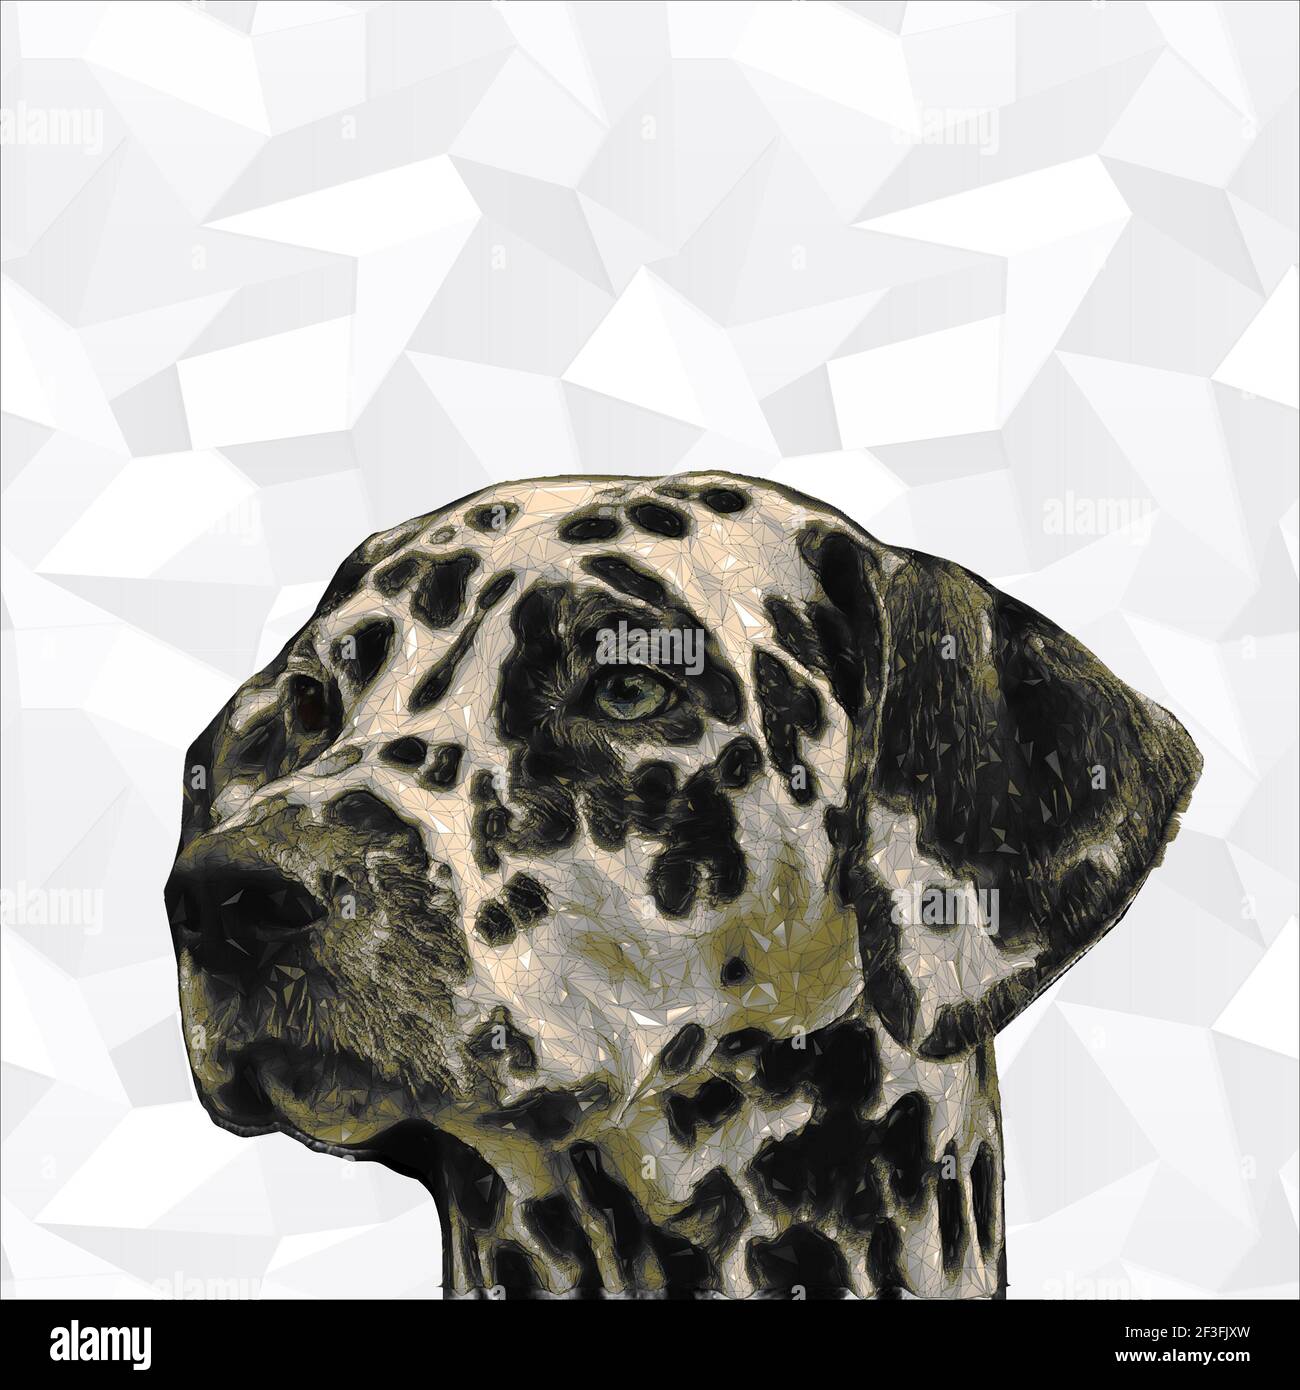 Dalmatian dog illustration formed by polygons Stock Photo